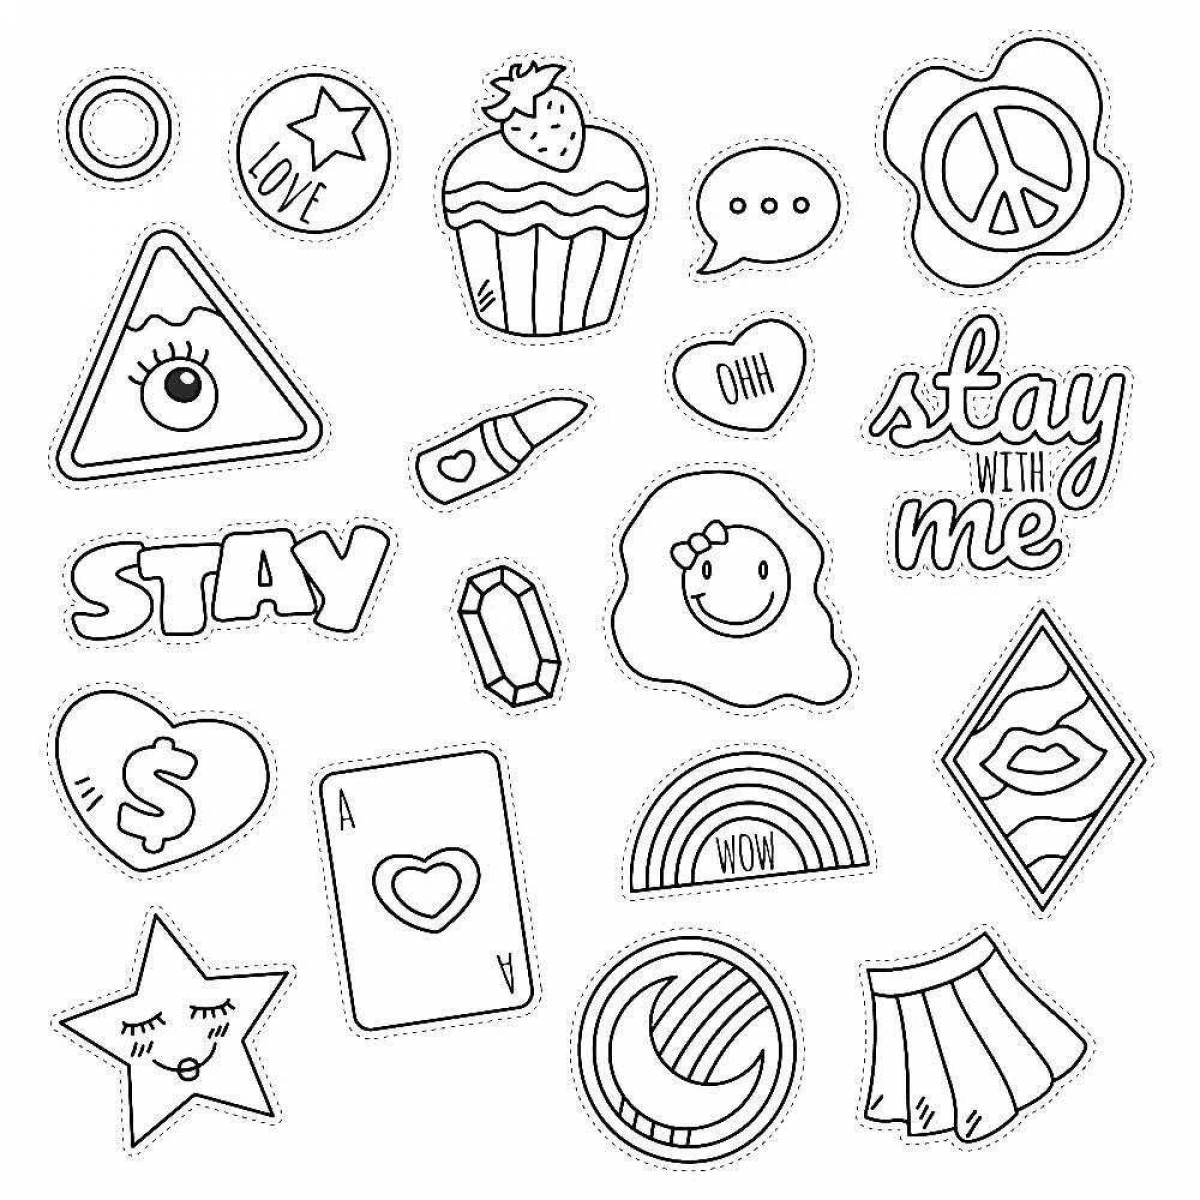 Exquisite coloring pages small stickers